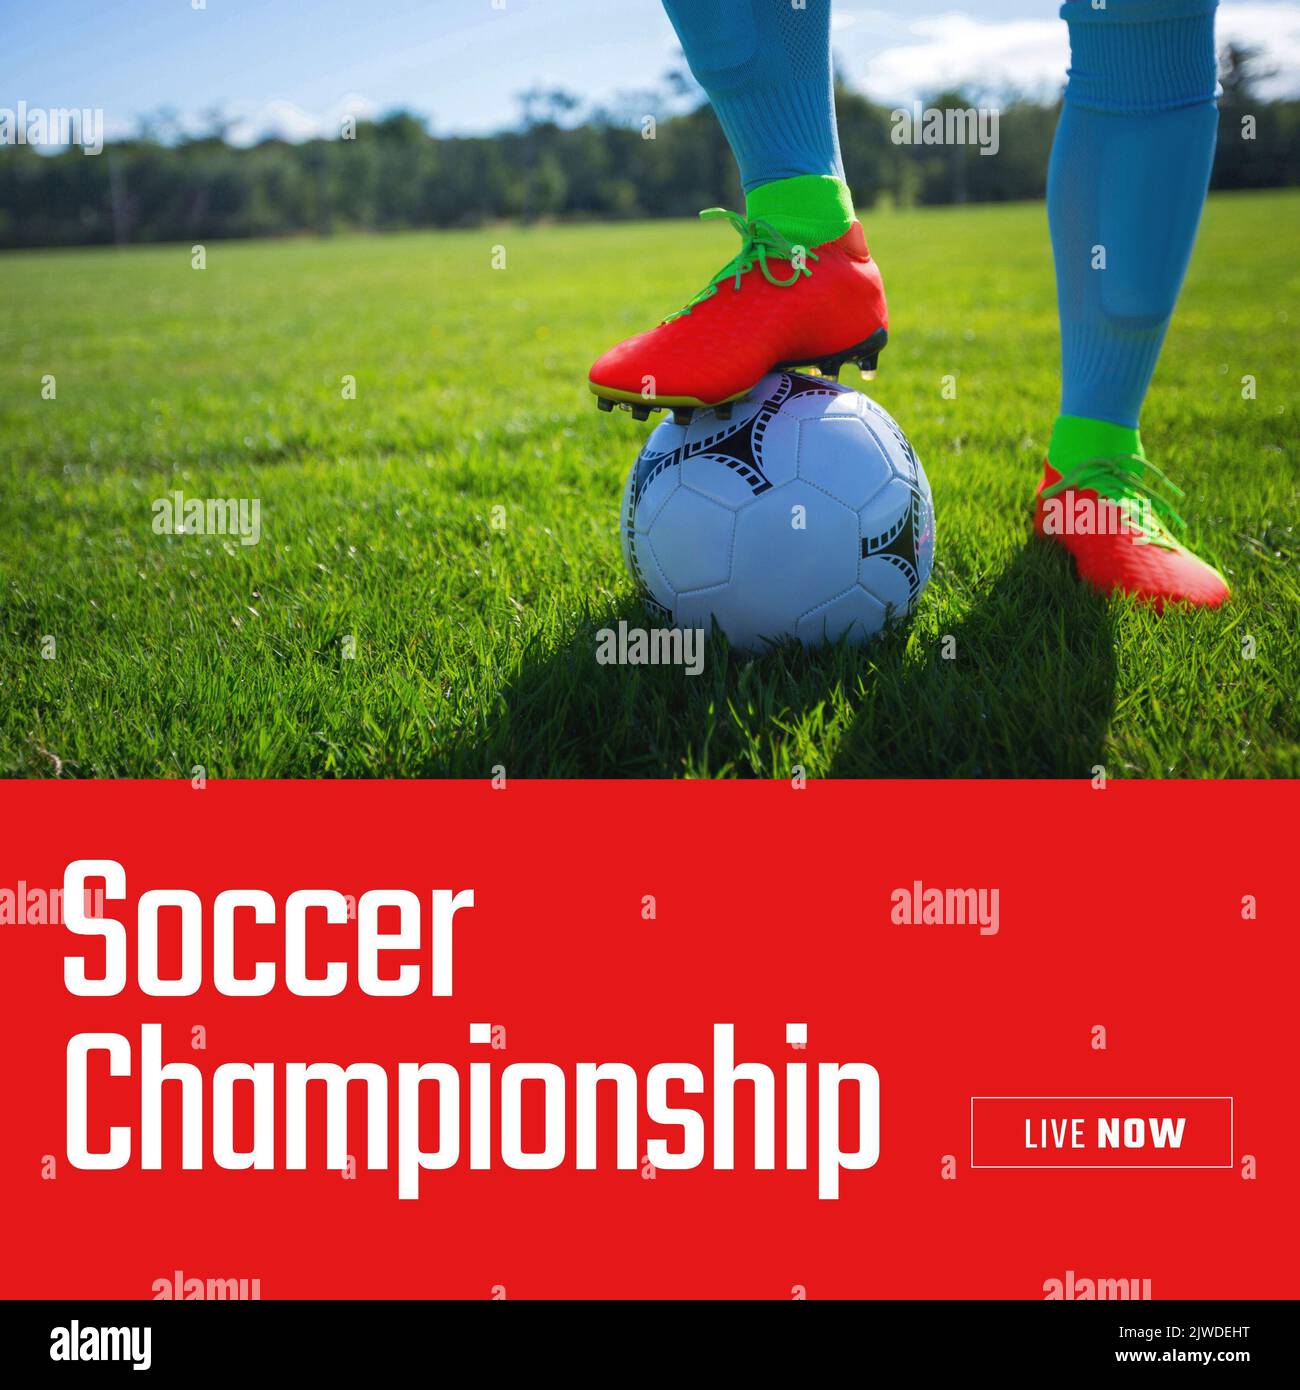 Composition of soccer championship text with football player at pitch Stock Photo